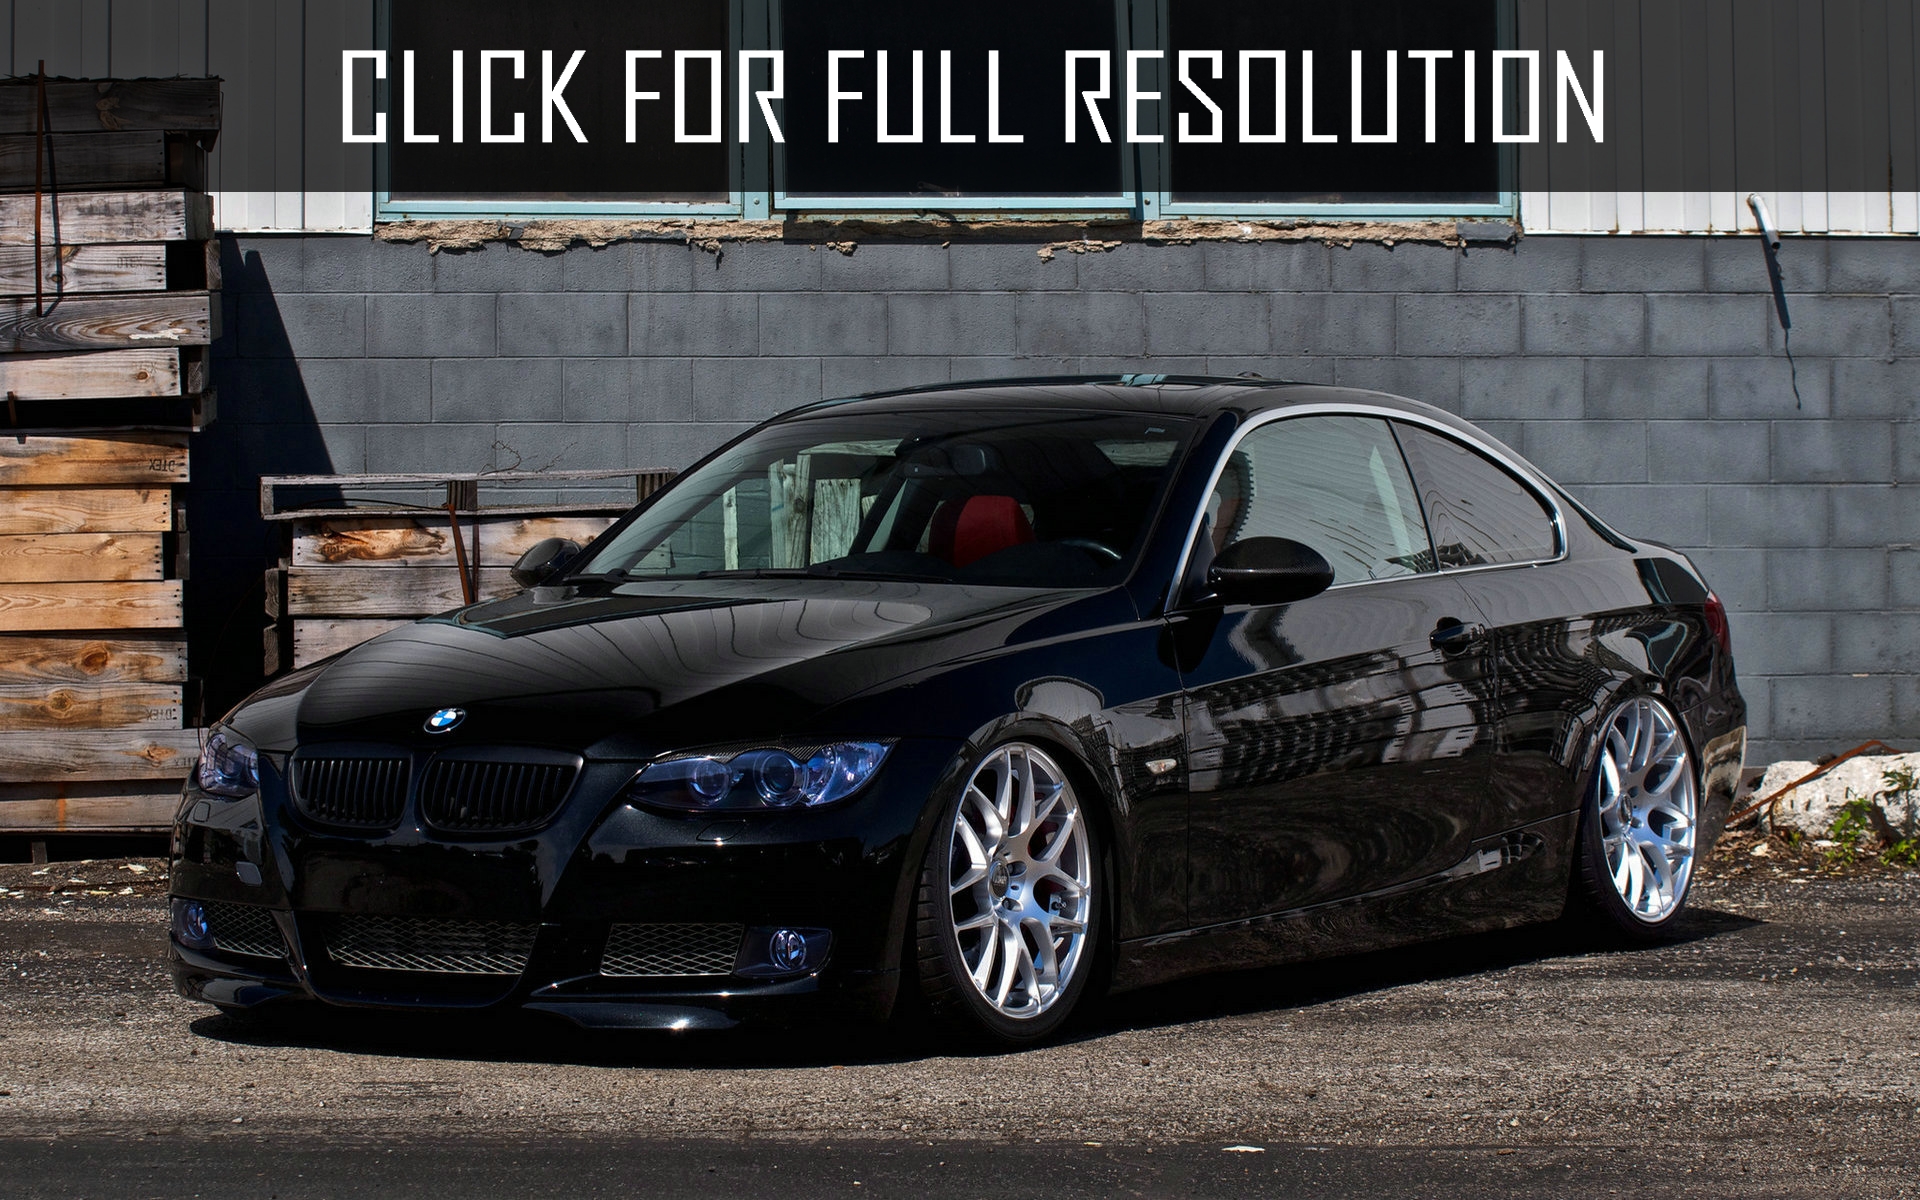 2014 Bmw 325i news, reviews, msrp, ratings with amazing